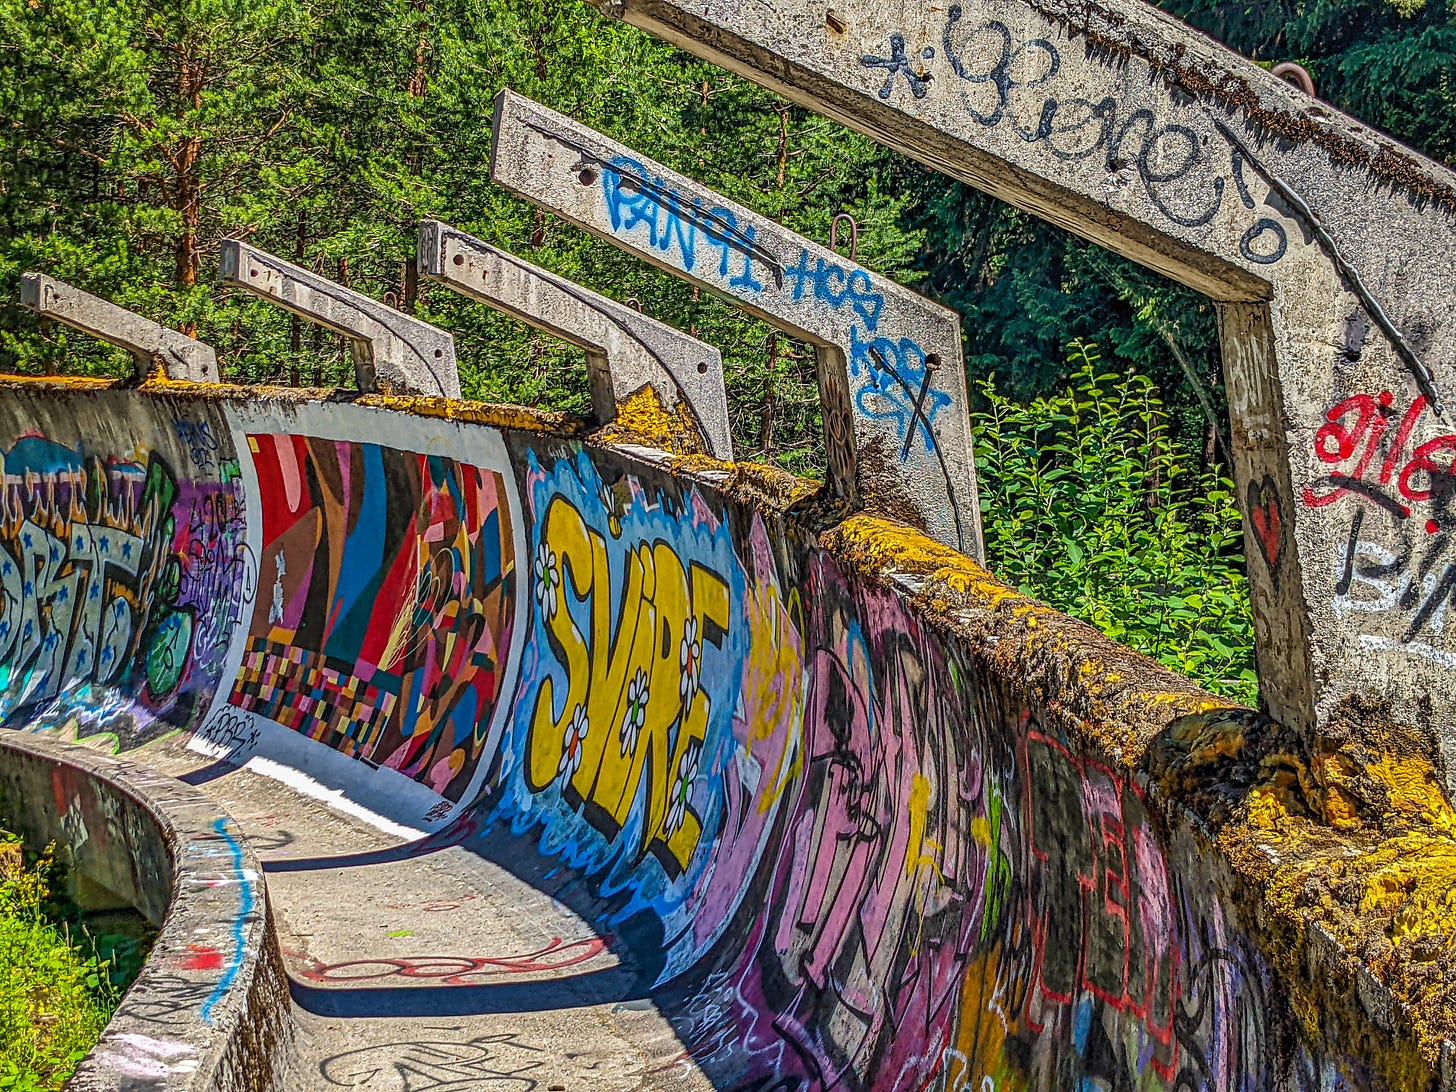 One of the runs curving away, the concrete painted with different murals including the word "SVIRE" in bright yellow next to a geometric painting in reds and blues. The forest looms behind. 